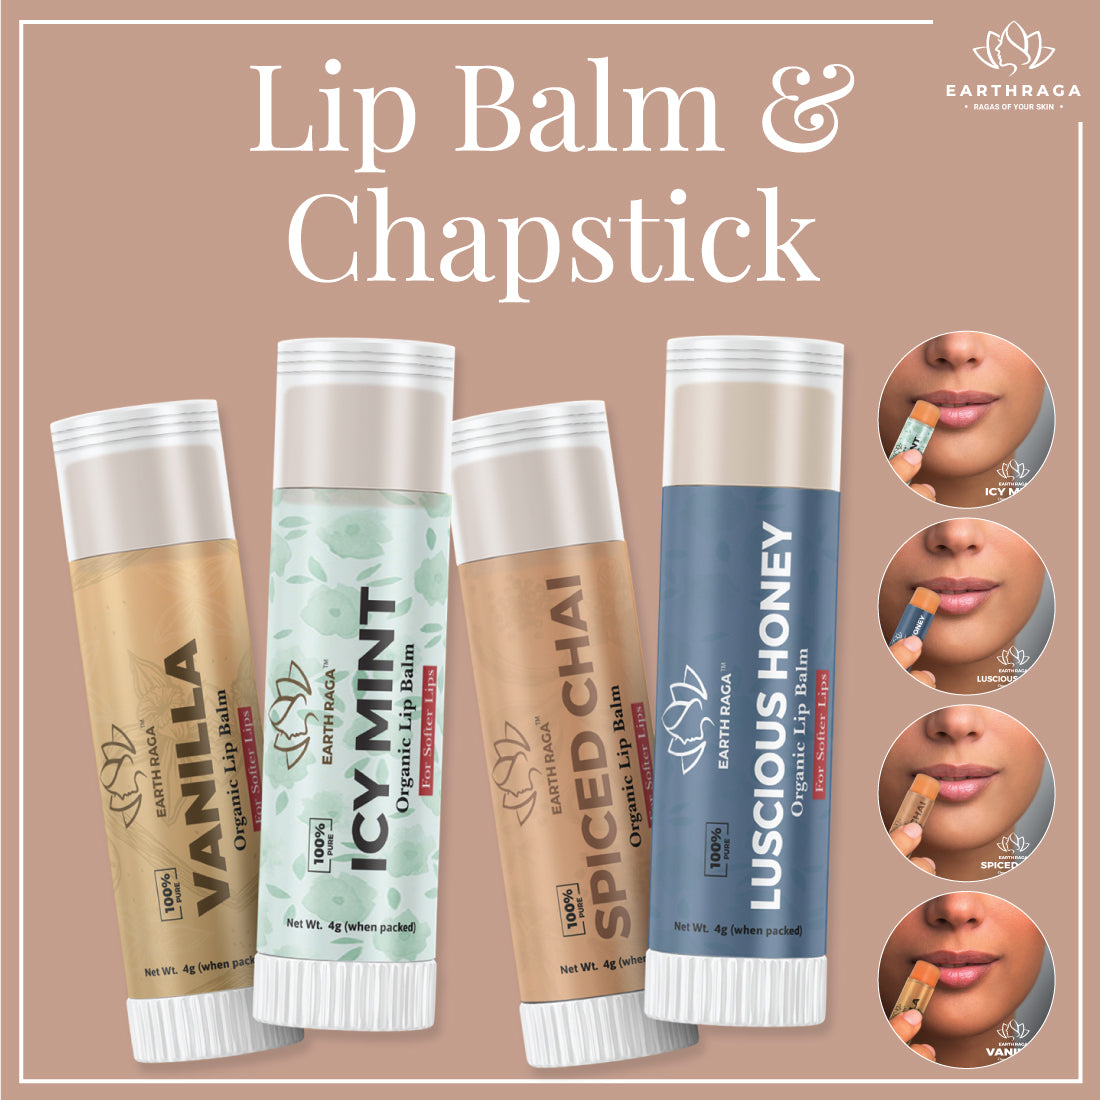 What is the difference between Lip Balm and Chapstick? - Earthraga